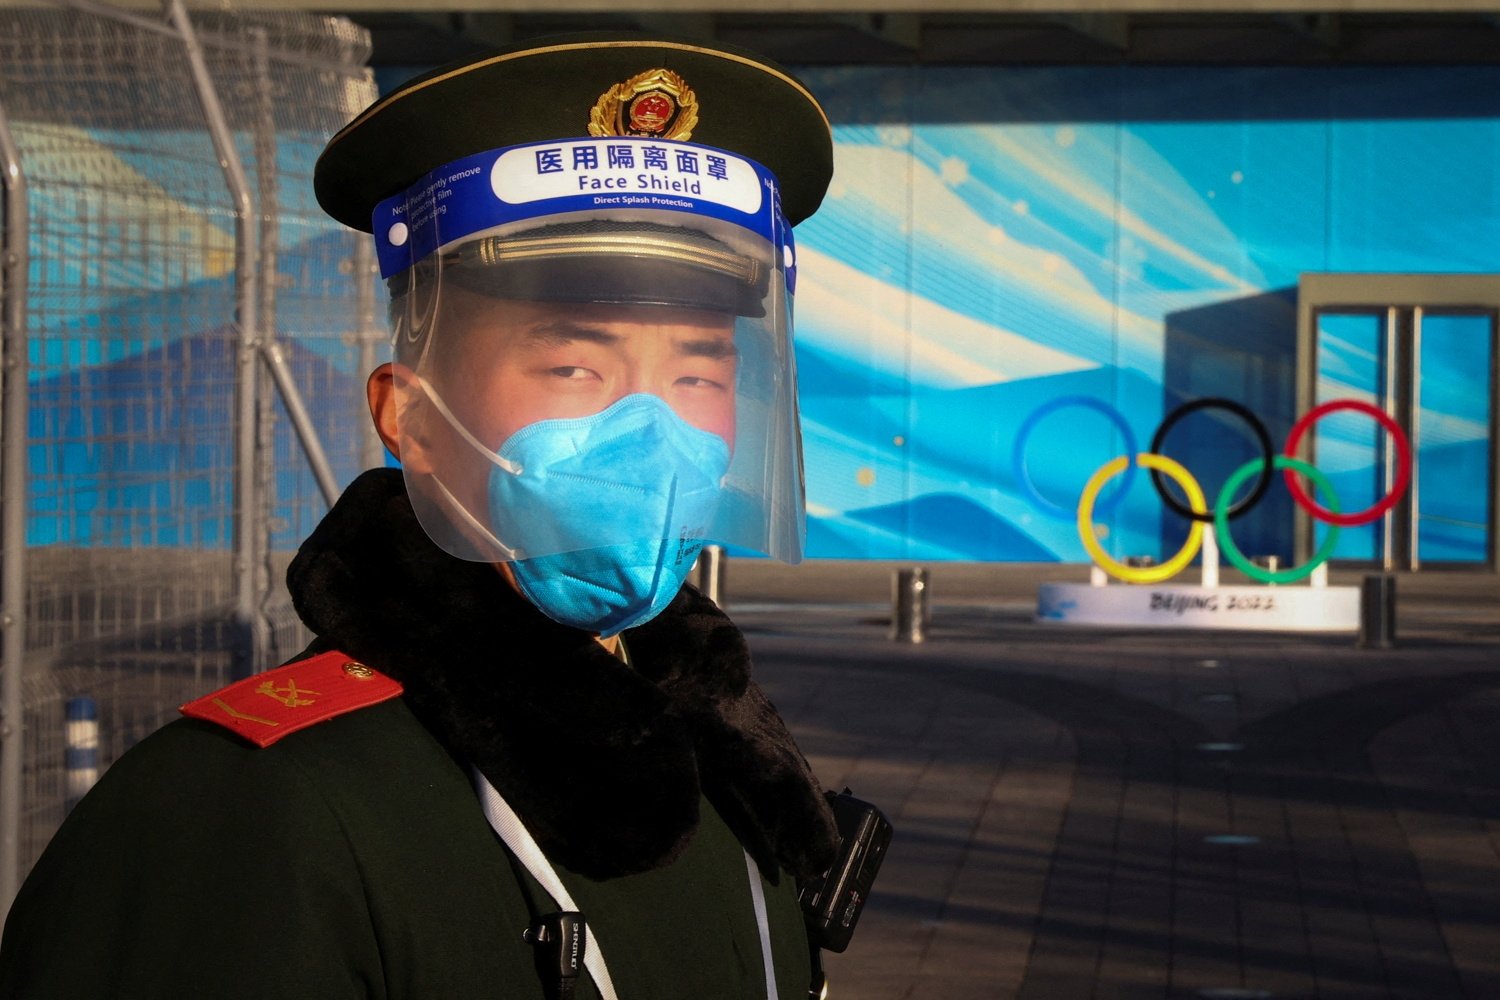 A paramilitary Police officer stands guard in a closed-loop area near a Beijing 2022 Winter Olympics venue, Beijing, China, Jan. 3, 2022. (Reuters Photo)